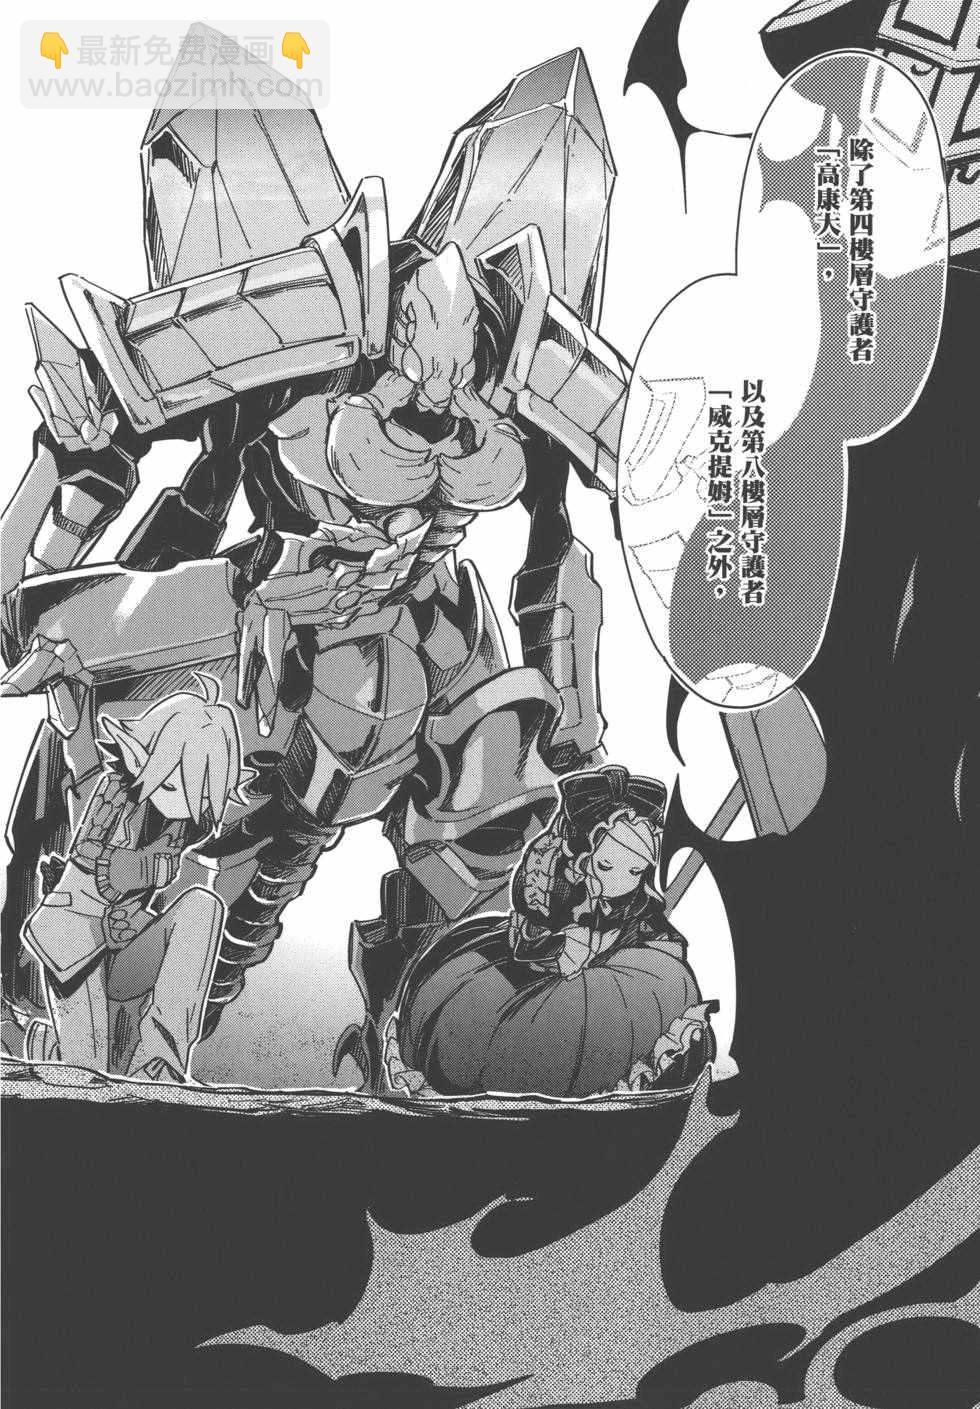 OVERLORD - 第1卷(2/4) - 2